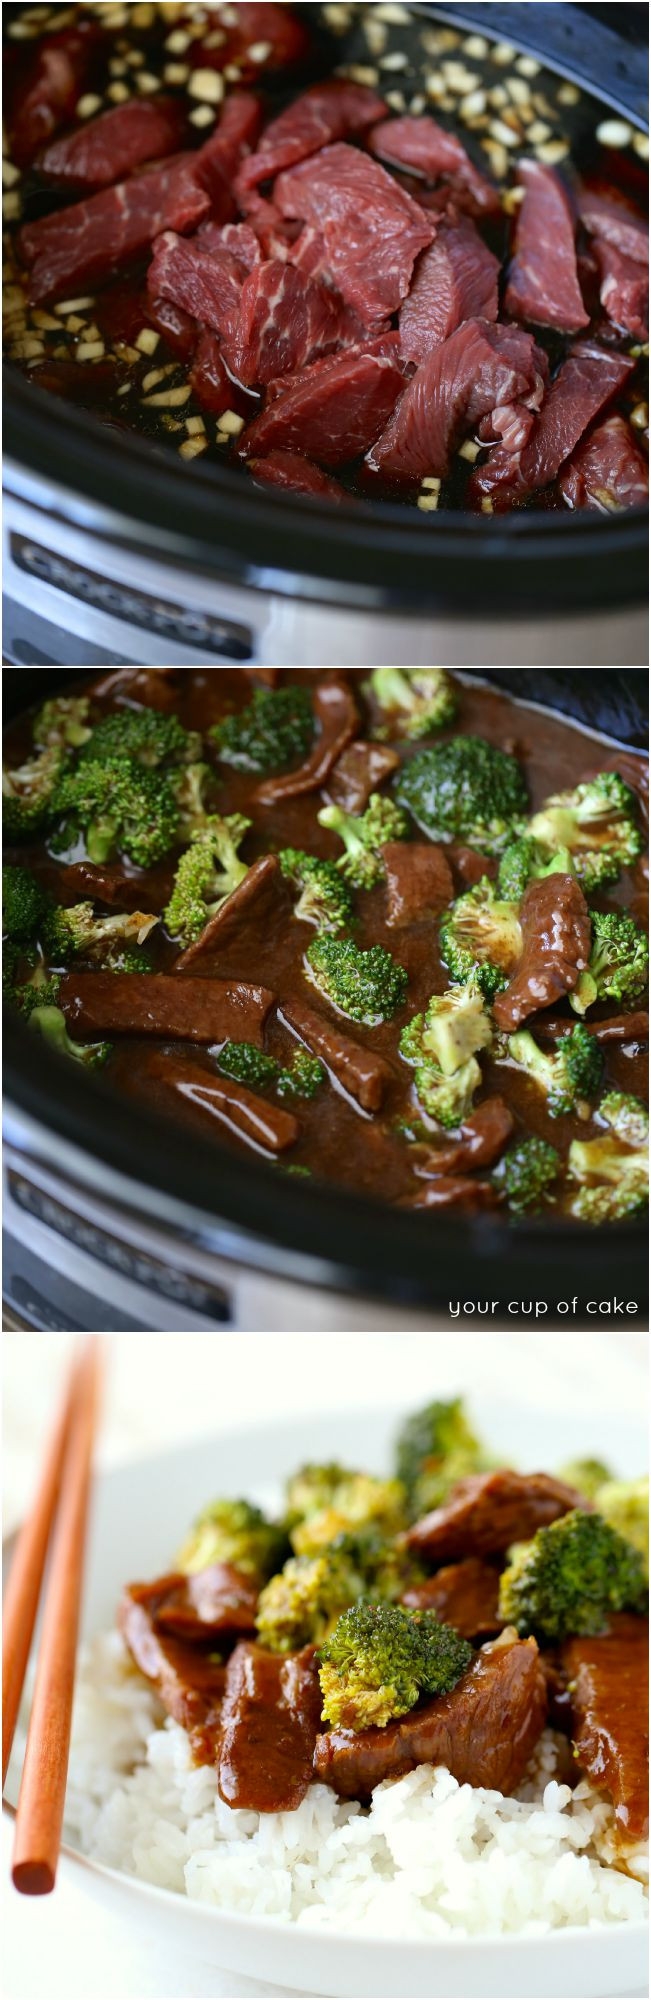 Slow Cooker Beef And Broccoli
 Slow Cooker Beef and Broccoli Your Cup of Cake